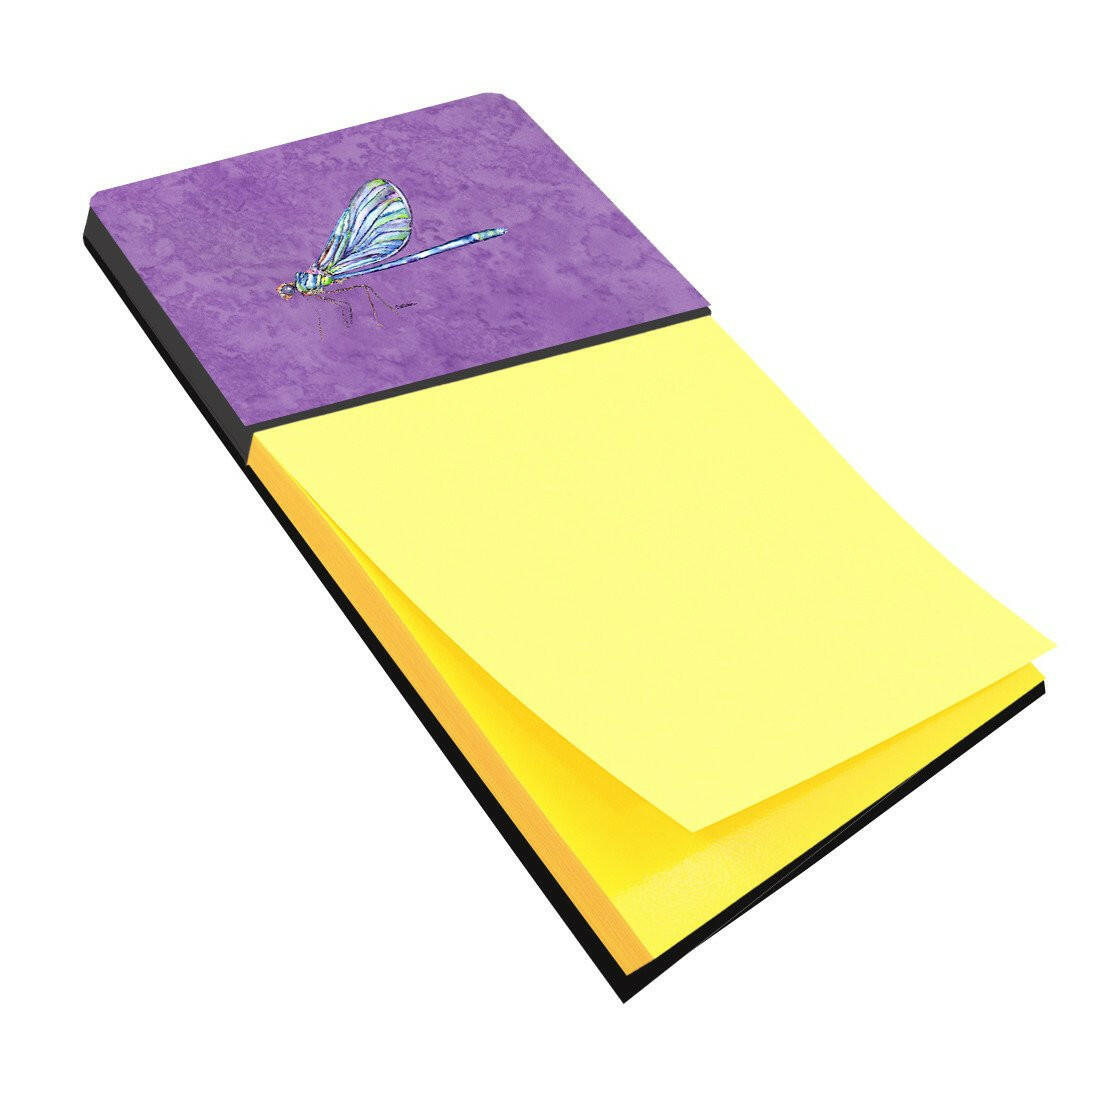 Dragonfly on Purple Refiillable Sticky Note Holder or Postit Note Dispenser 8865SN by Caroline's Treasures